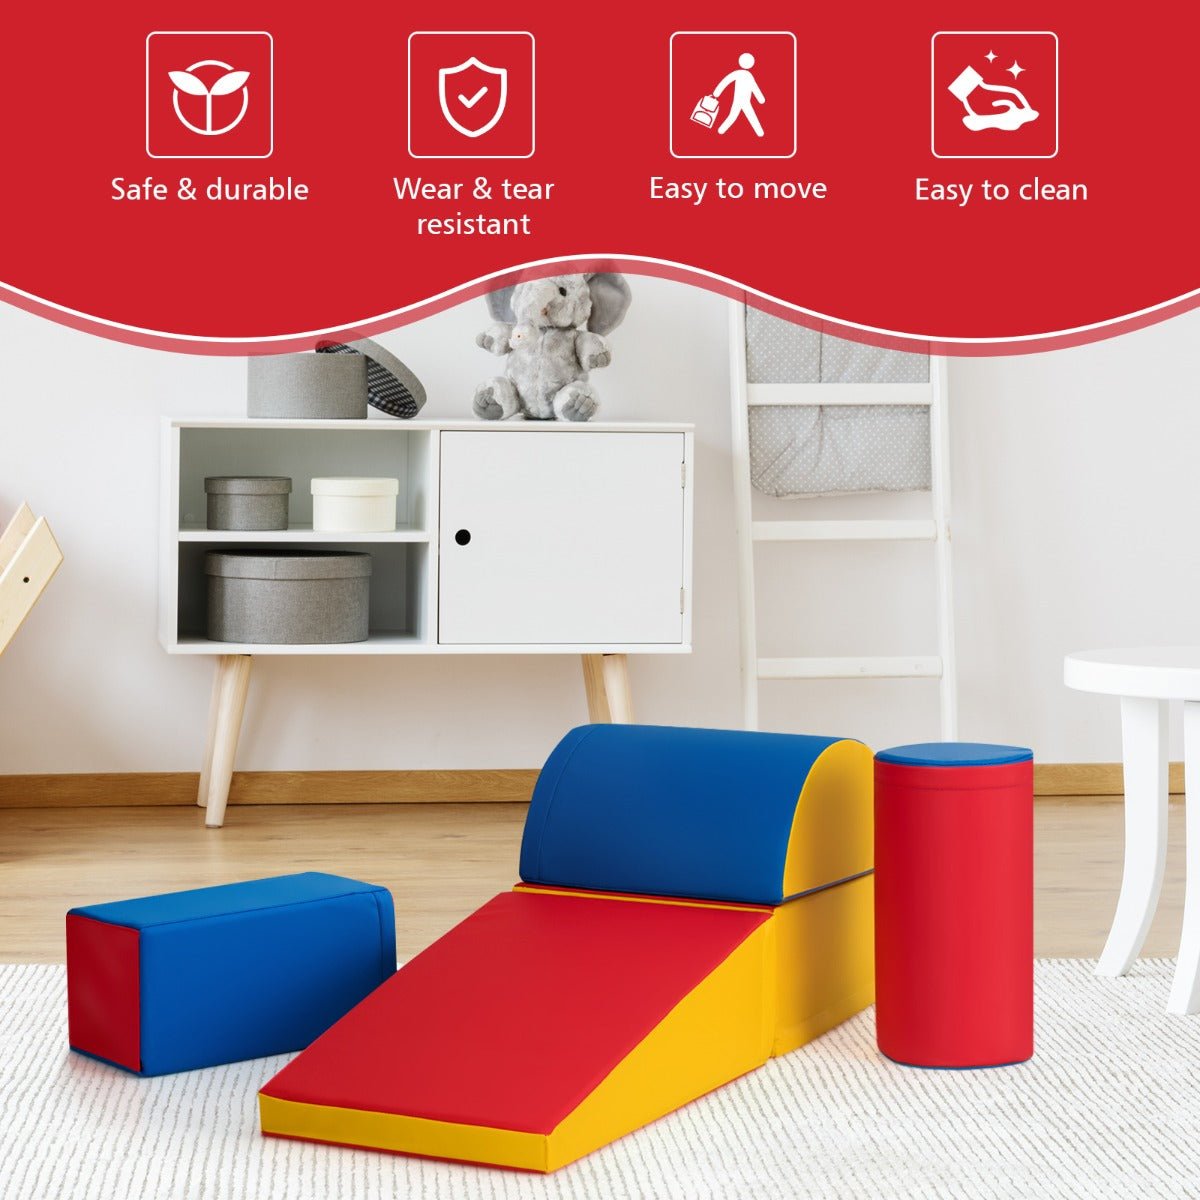 Get Active with the 5-Piece Foam Blocks - Shop Now!